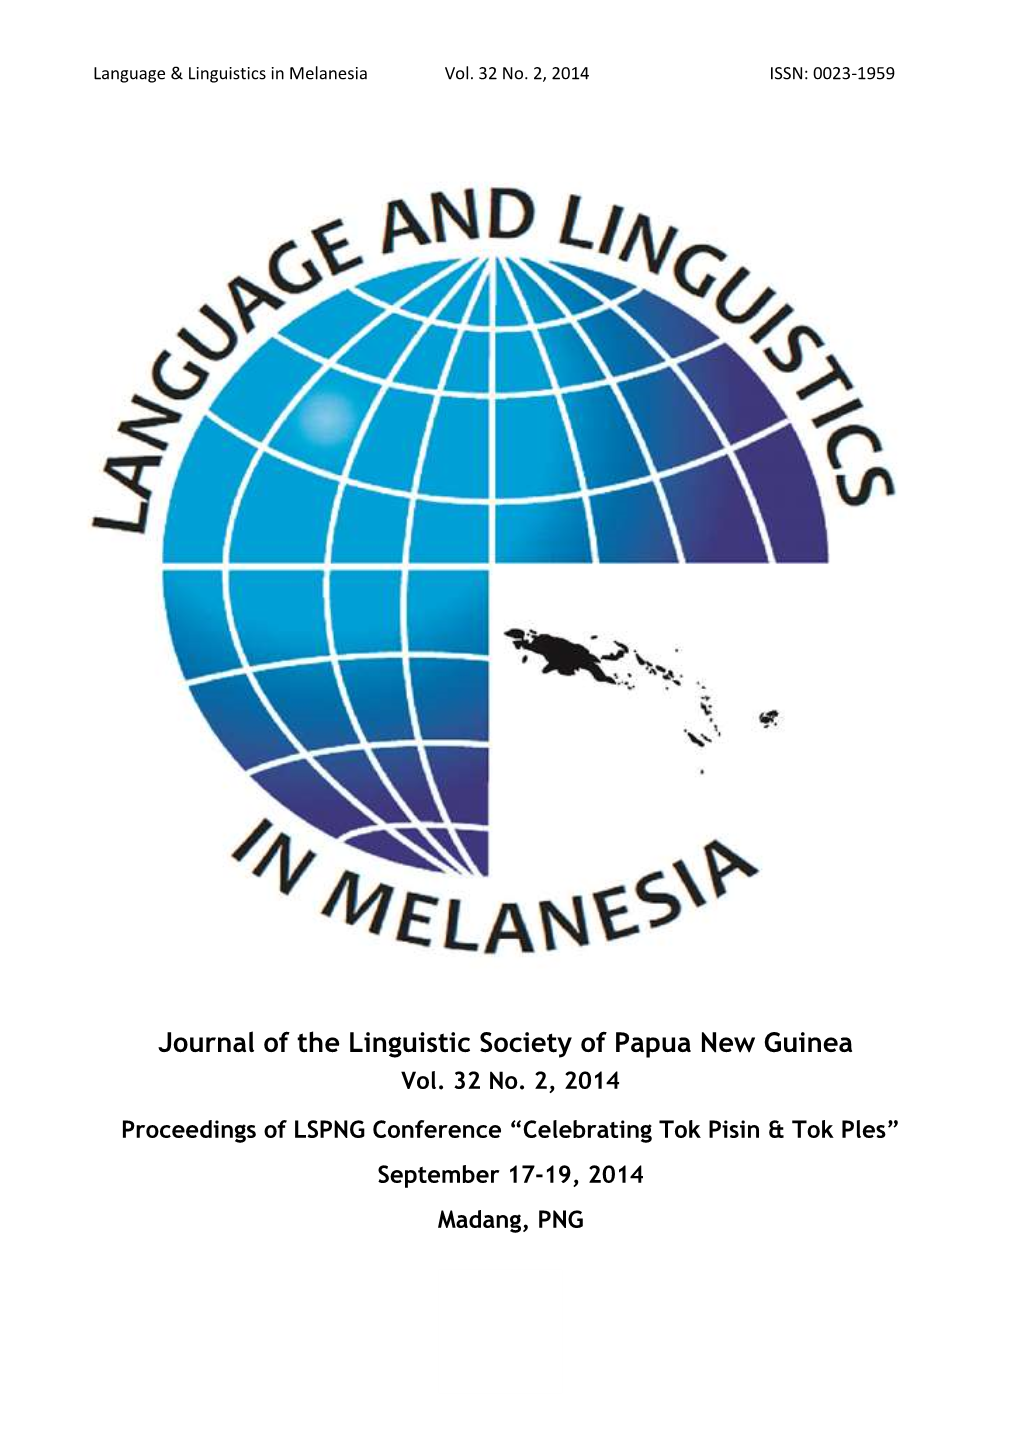 Journal of the Linguistic Society of Papua New Guinea